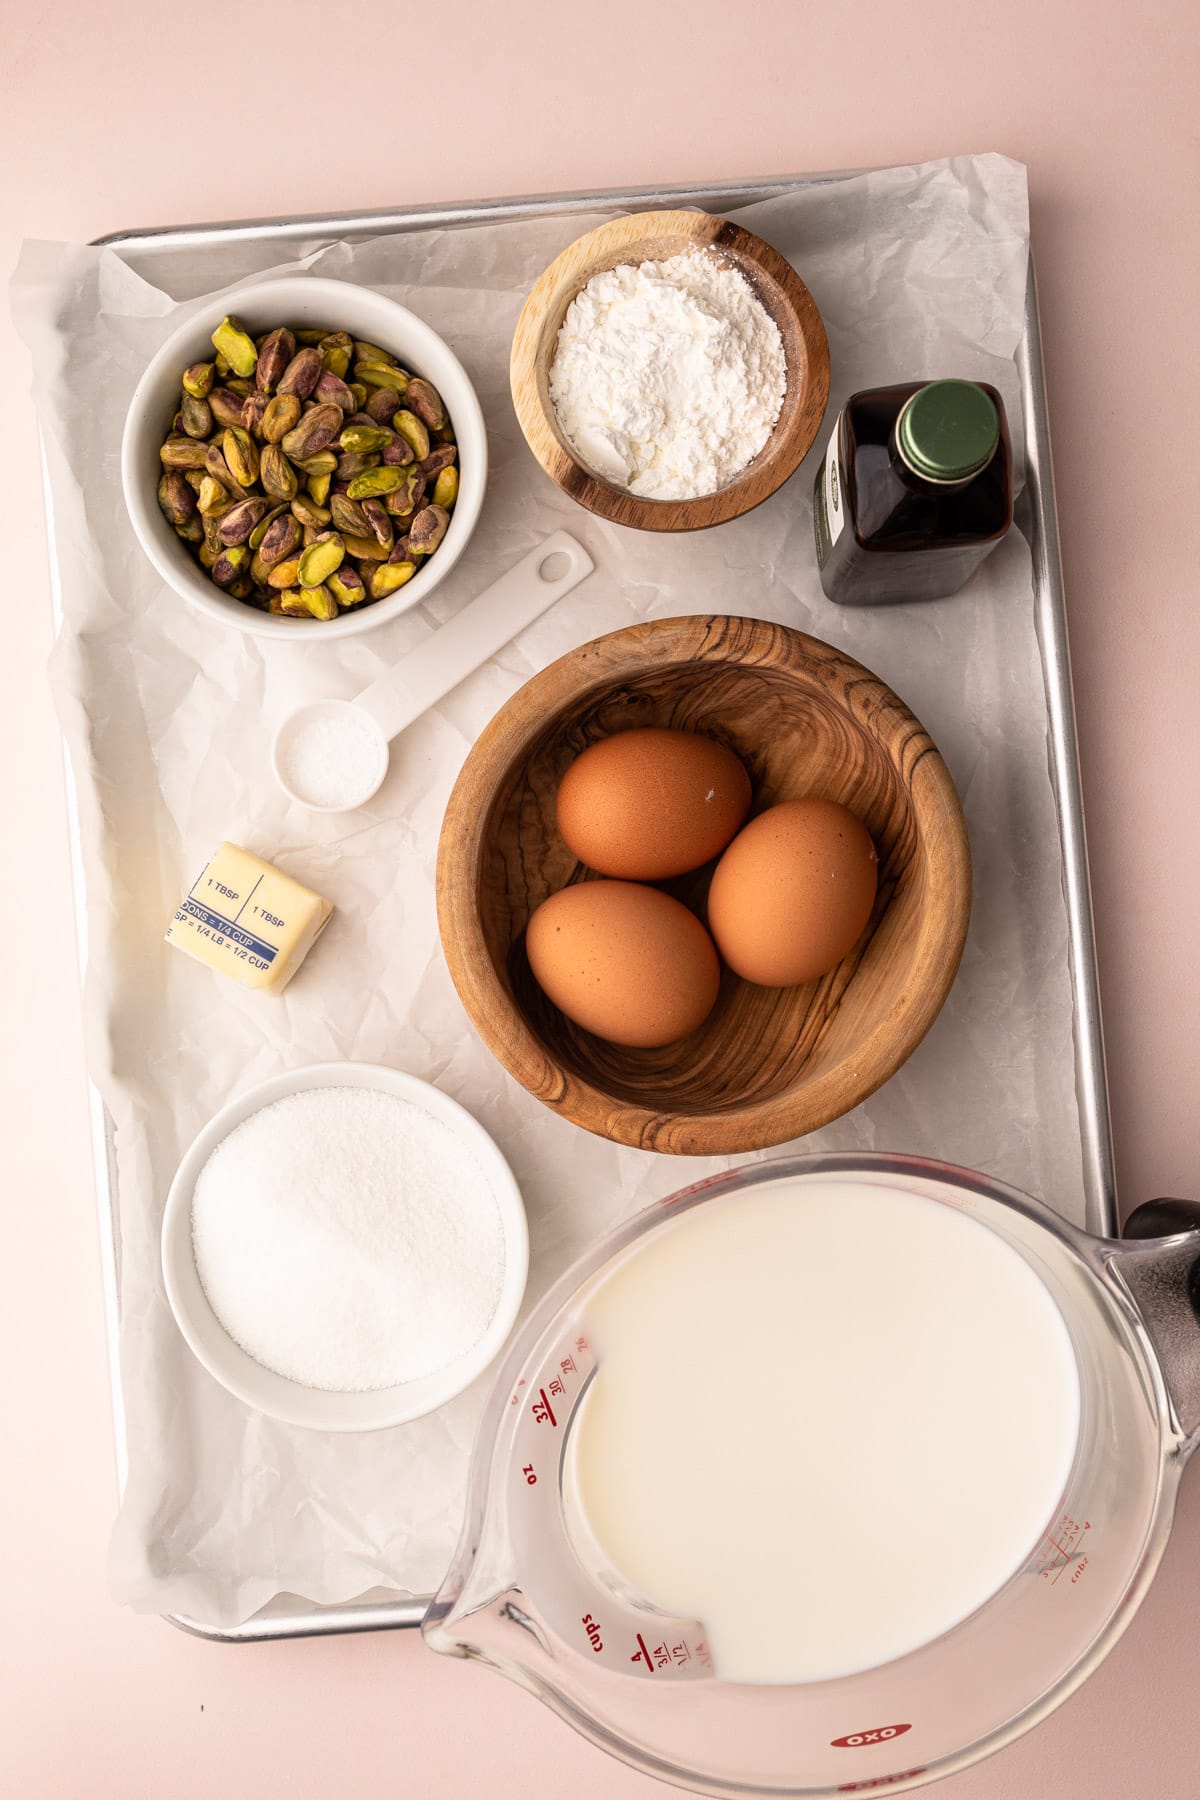 Ingredients for pistachio pudding on a tray.